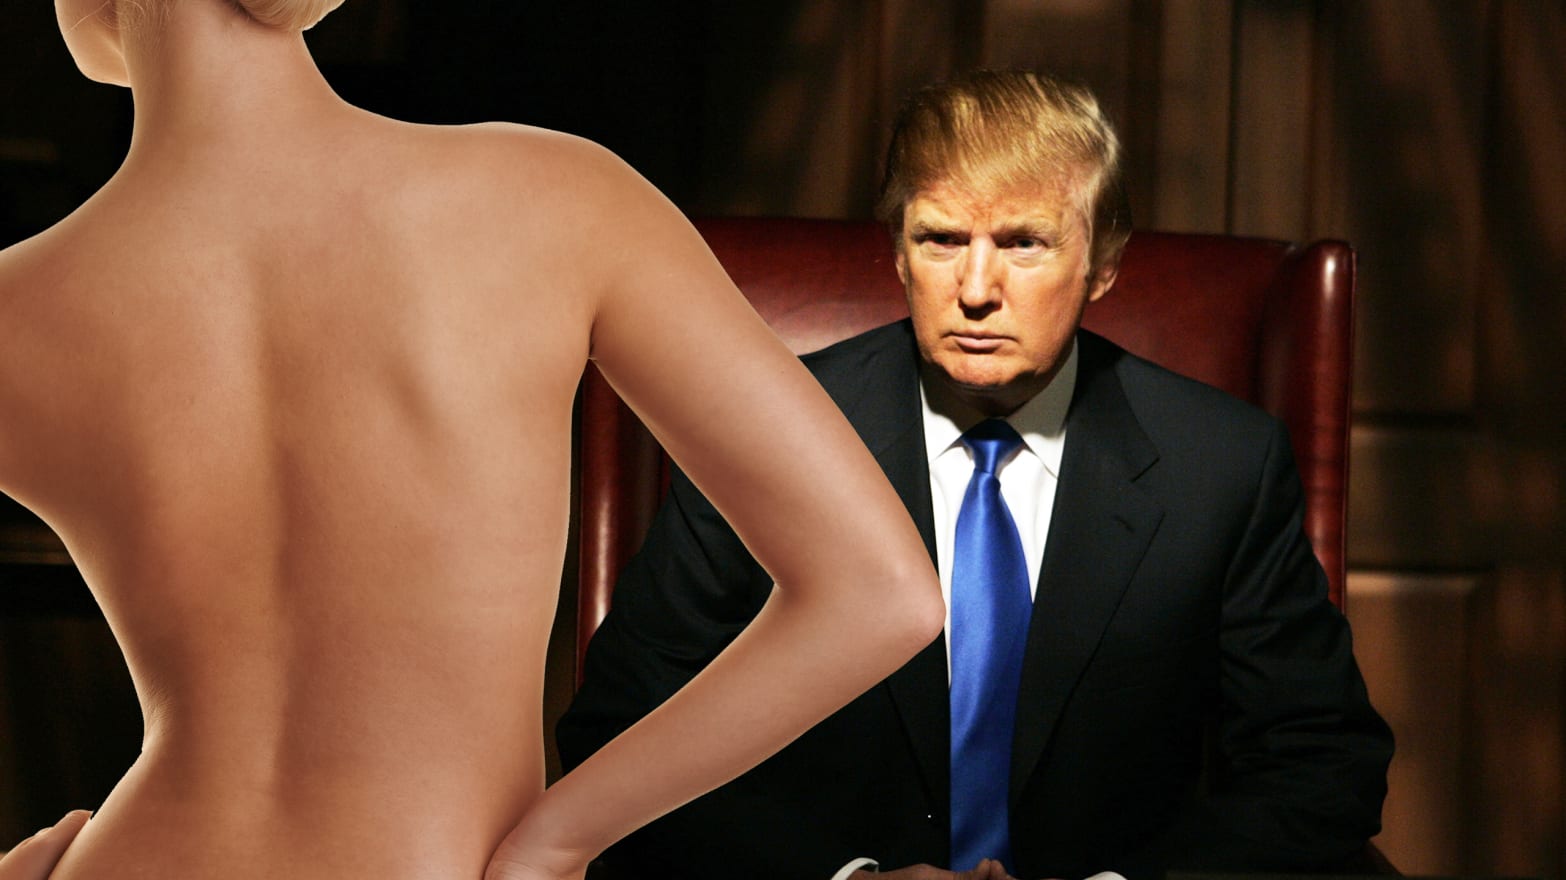 Donald Trump Nude Pics with download